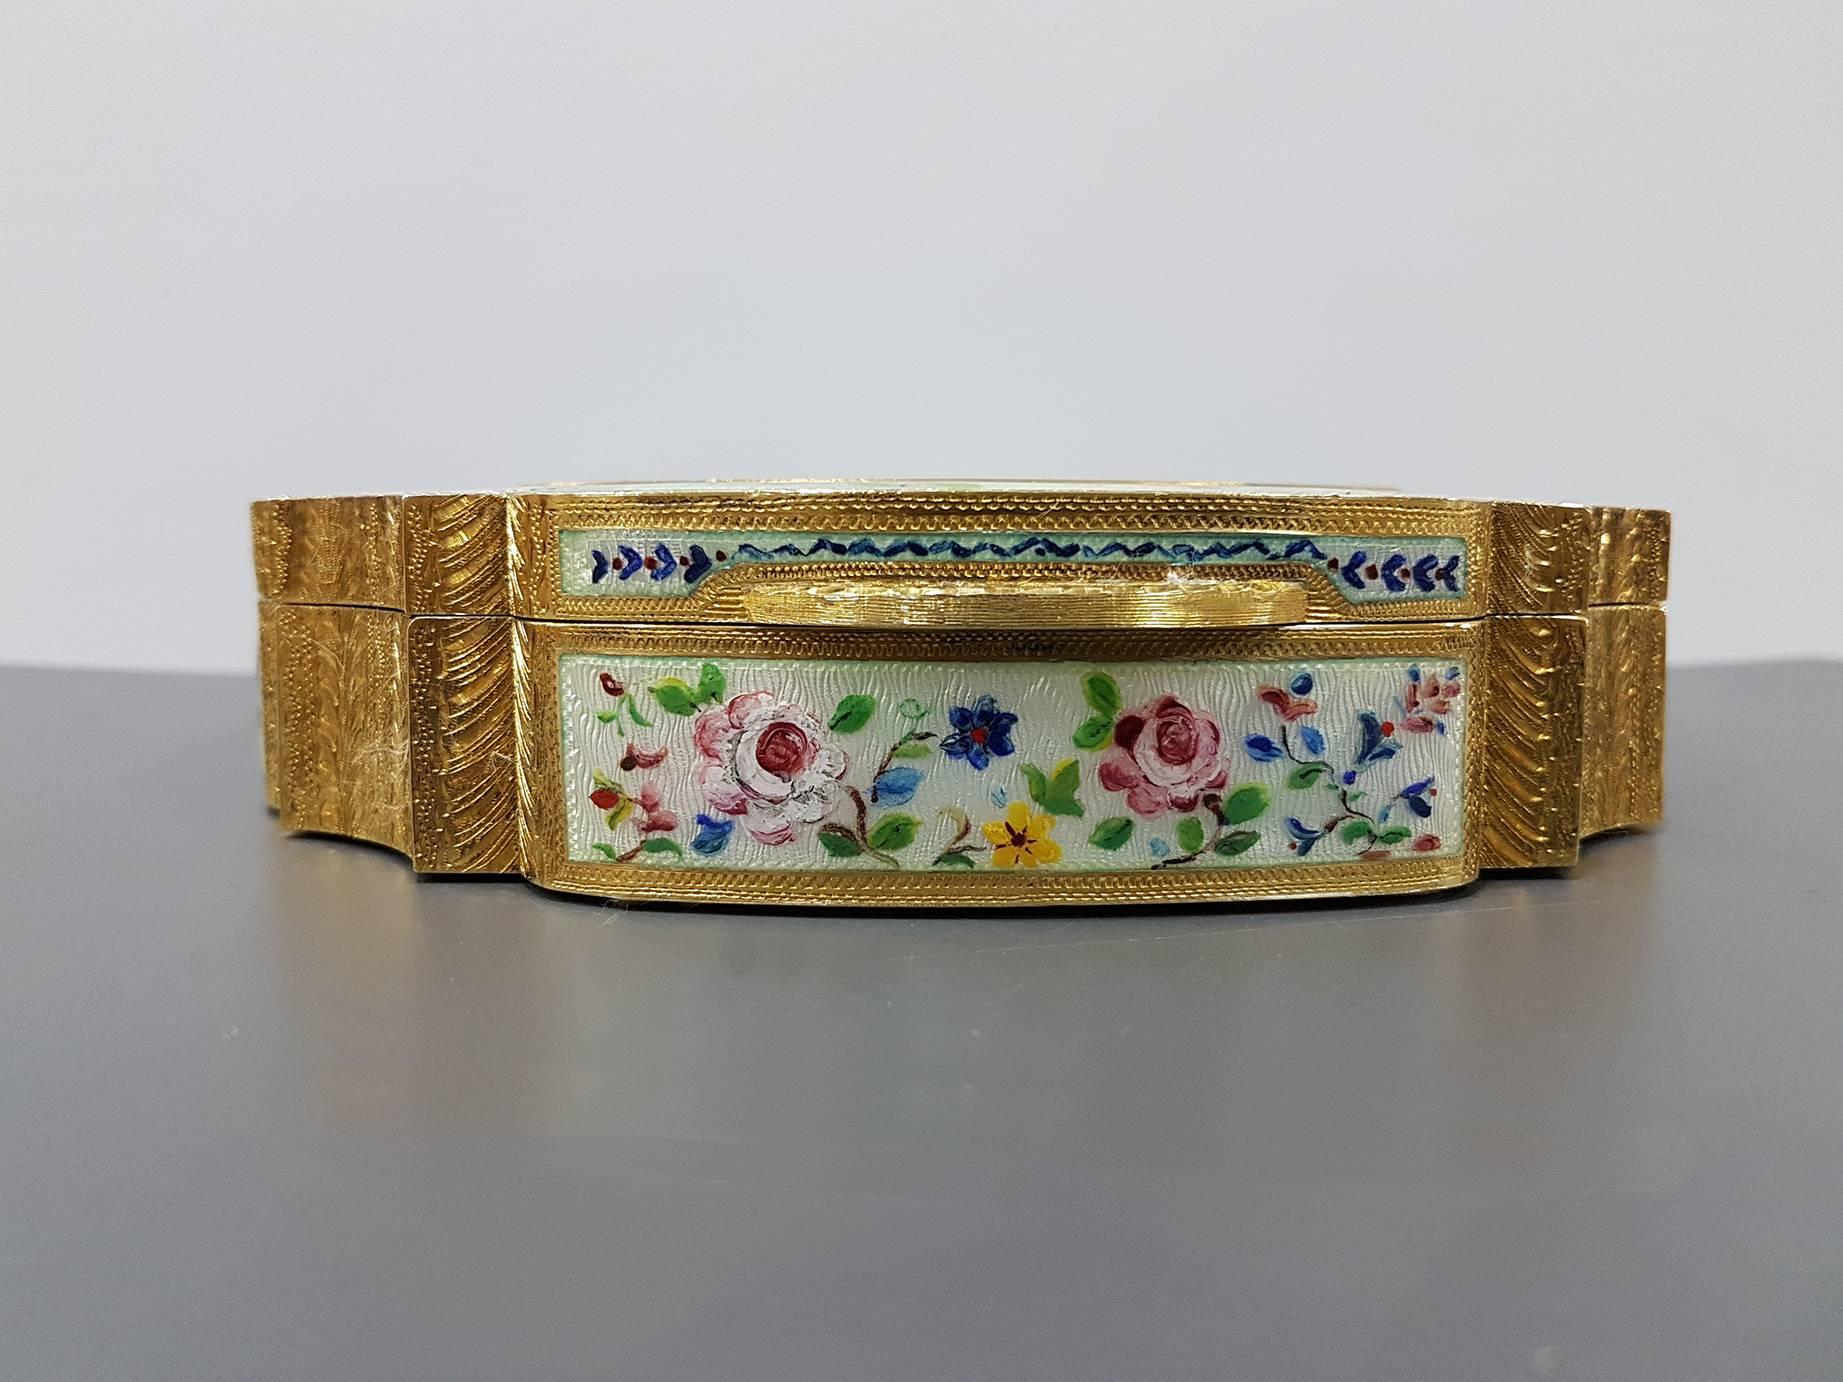 Round haped silver gilded 925/1000 table box with translucent enamels on guilloche with hand-painted floral miniatures and gold paillons
Made in Italy
1.400 grams

The Miniatures are hand-painted on a usually white homogeneous enamel base. The